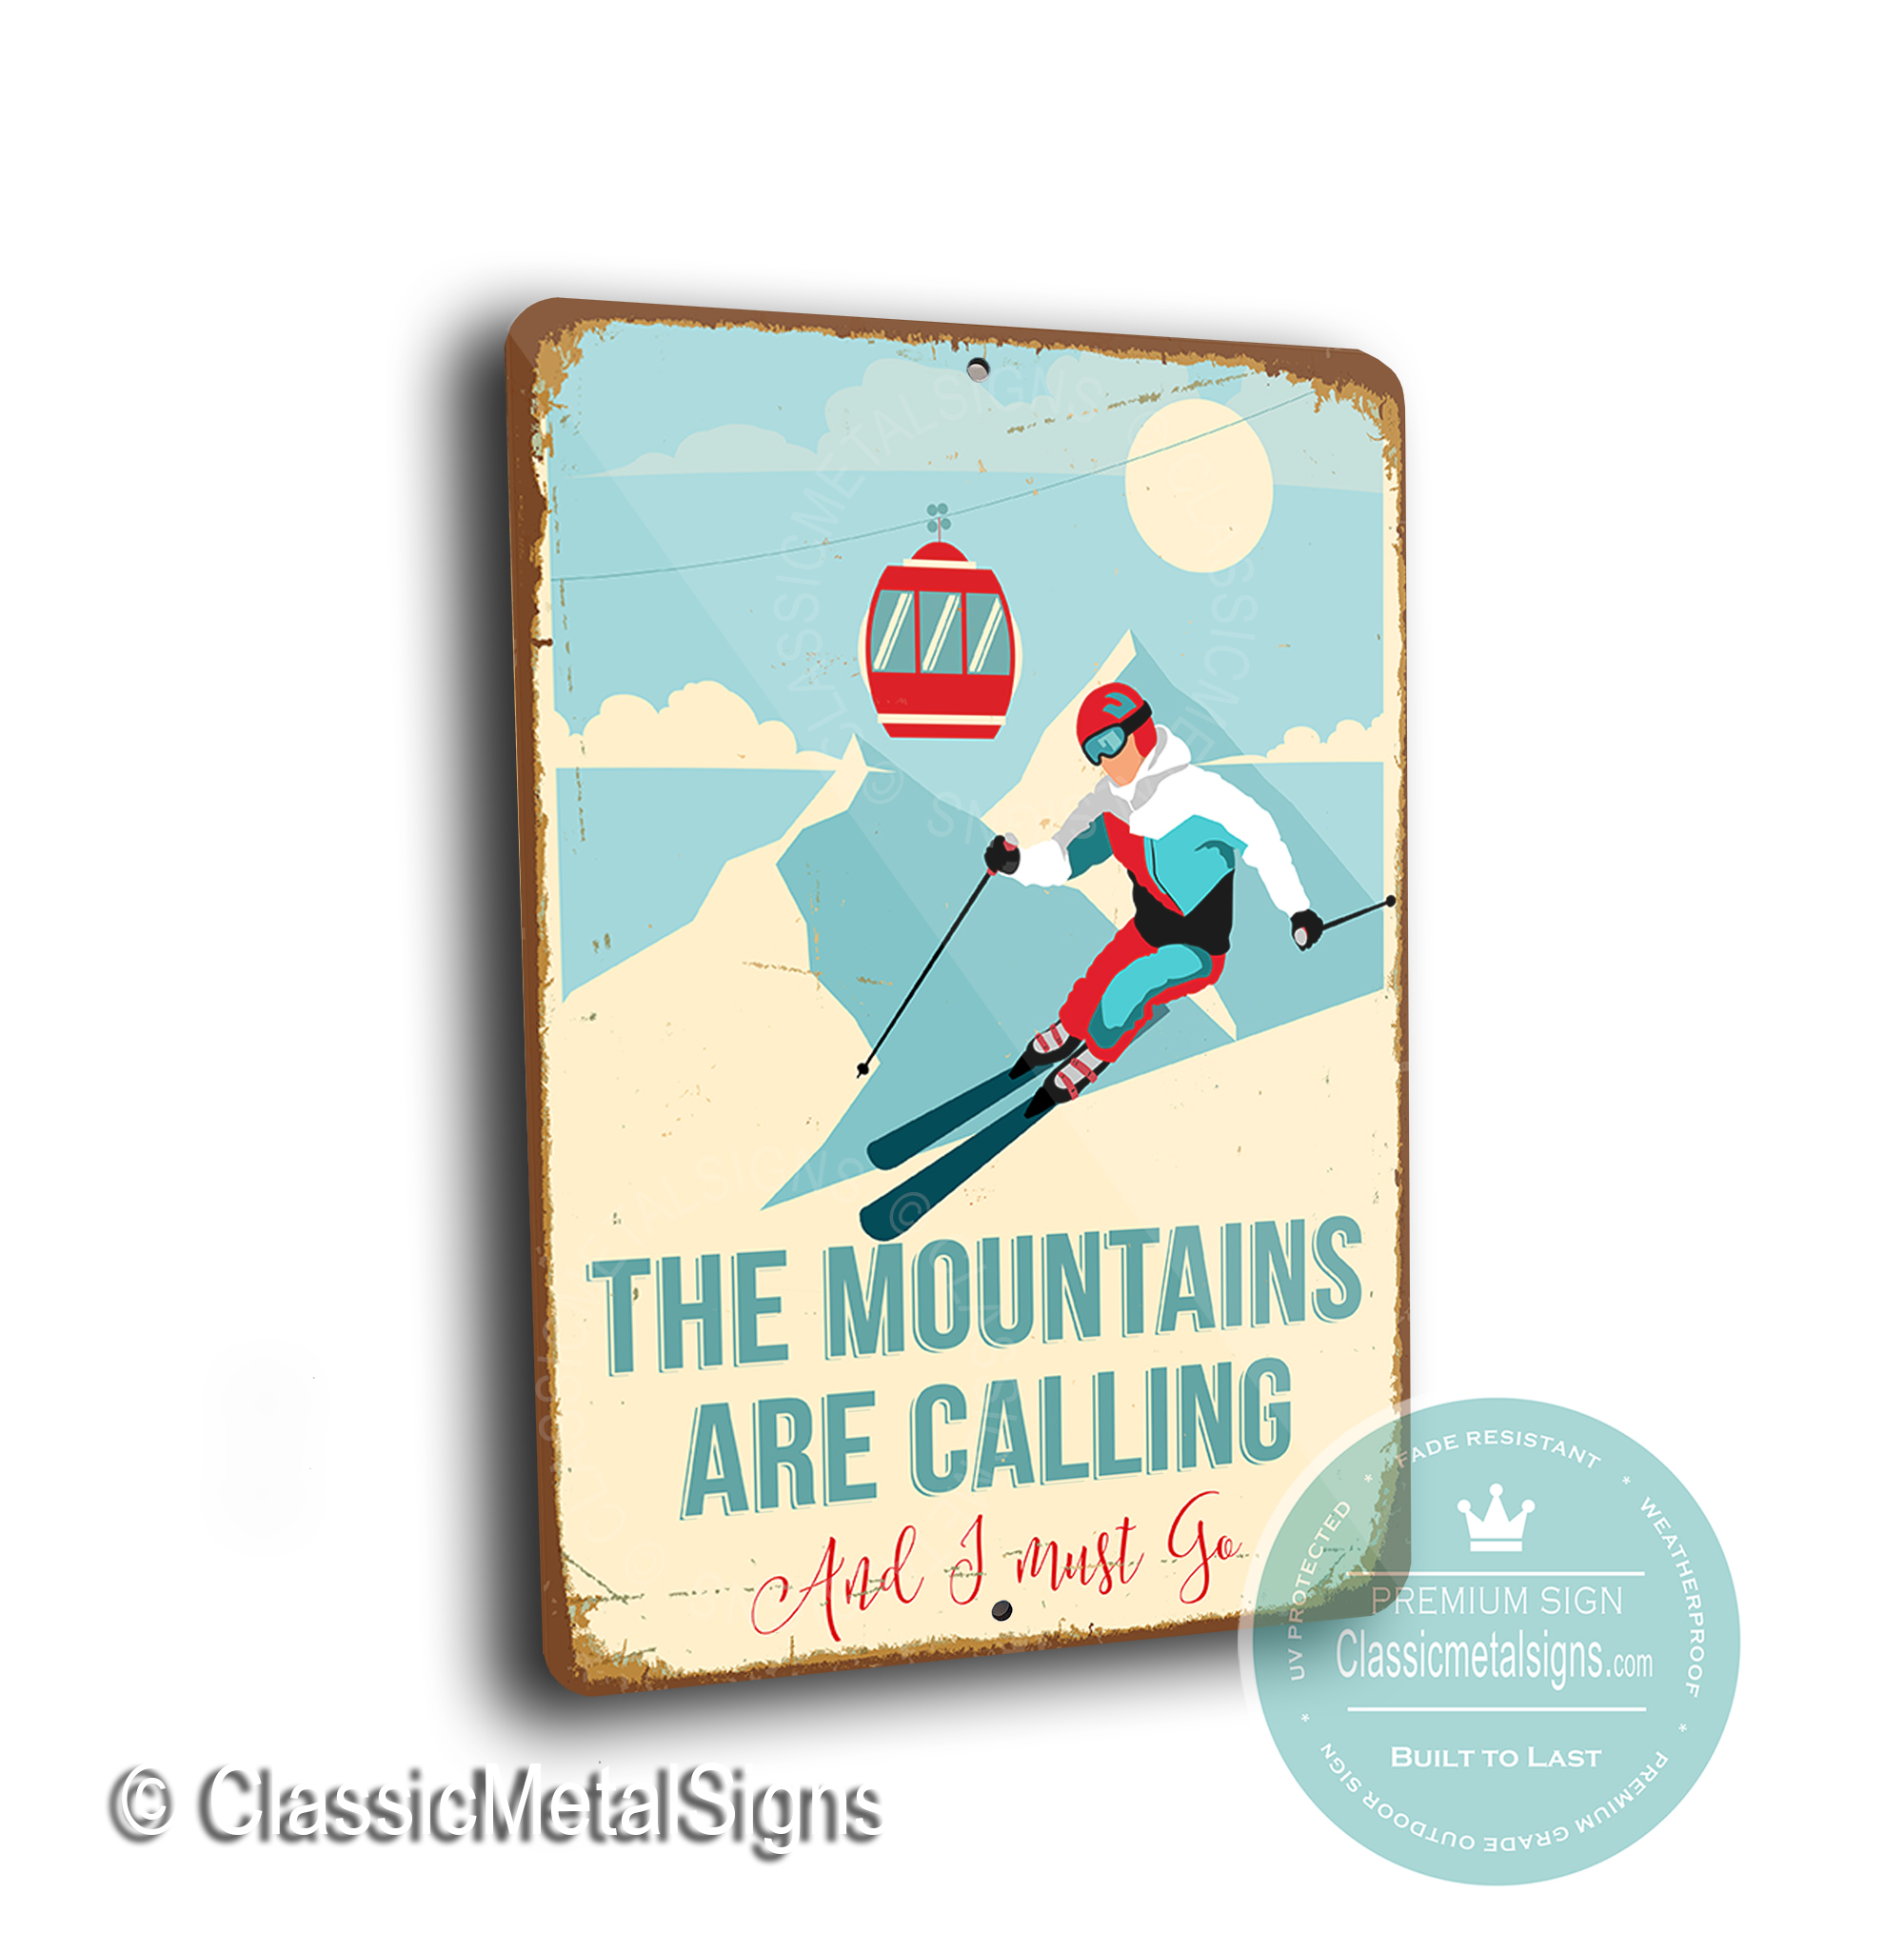 The Mountains are Calling Sign